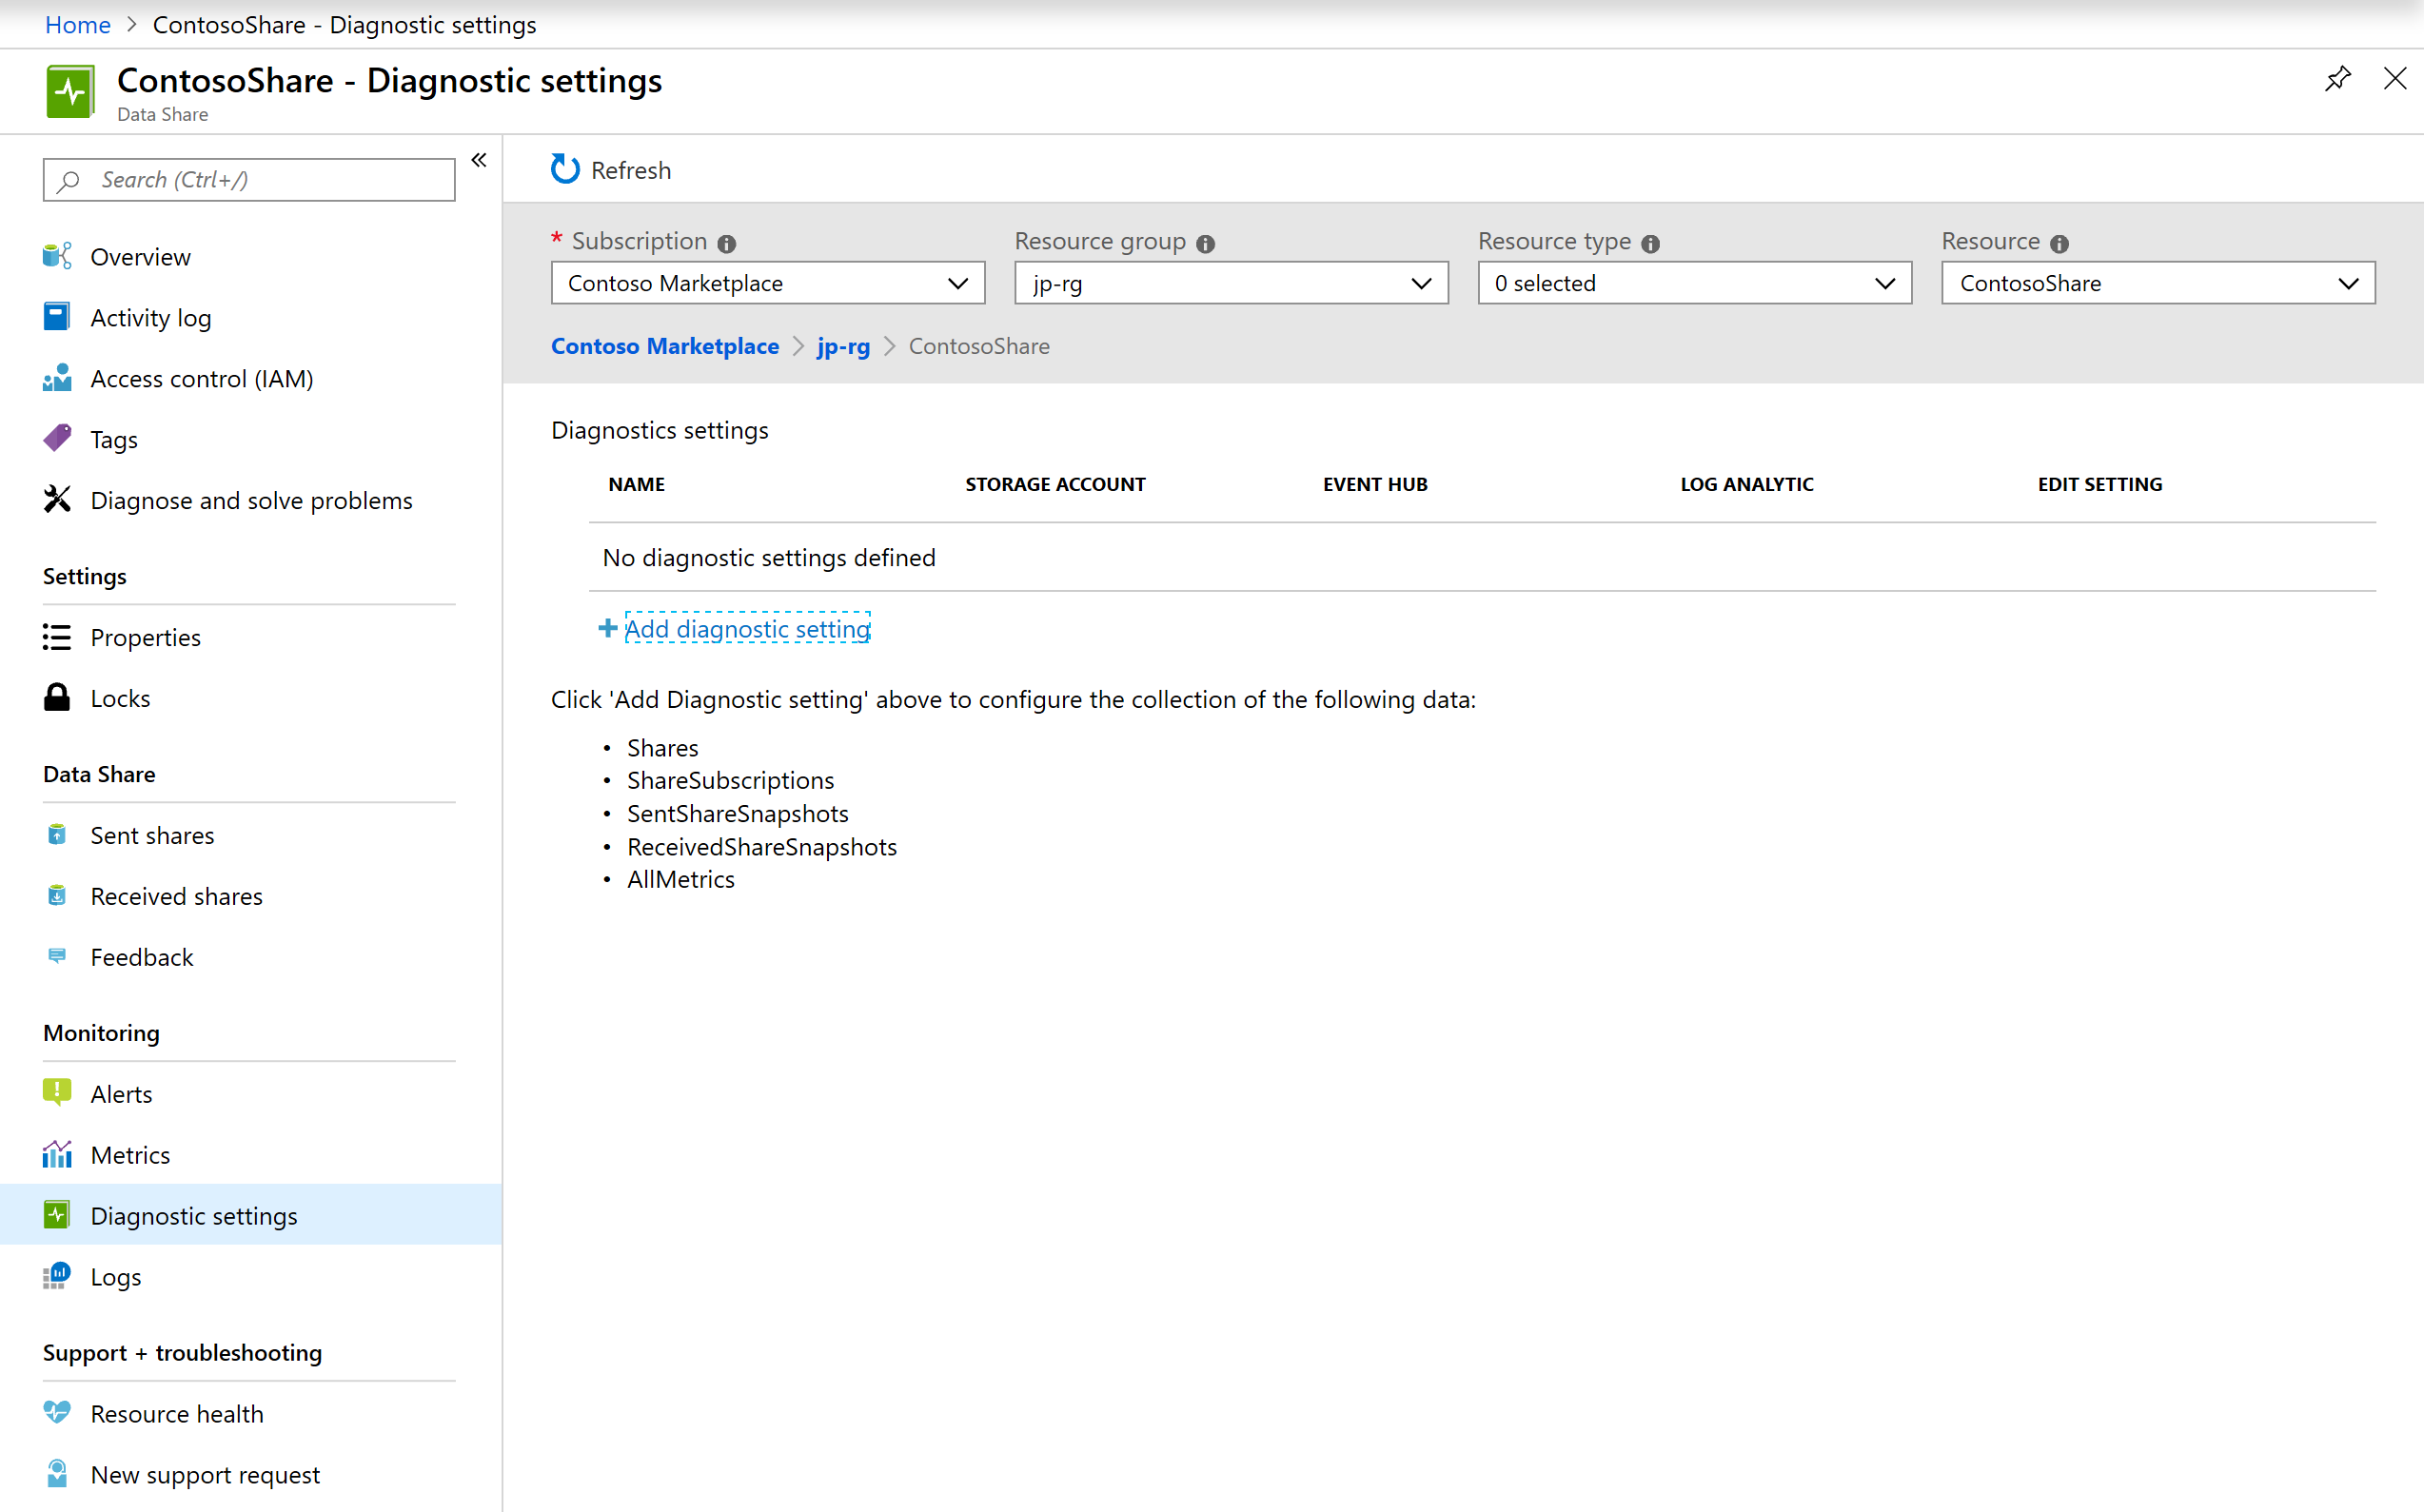 Screenshot that shows the Diagnostic settings page in the Azure portal.